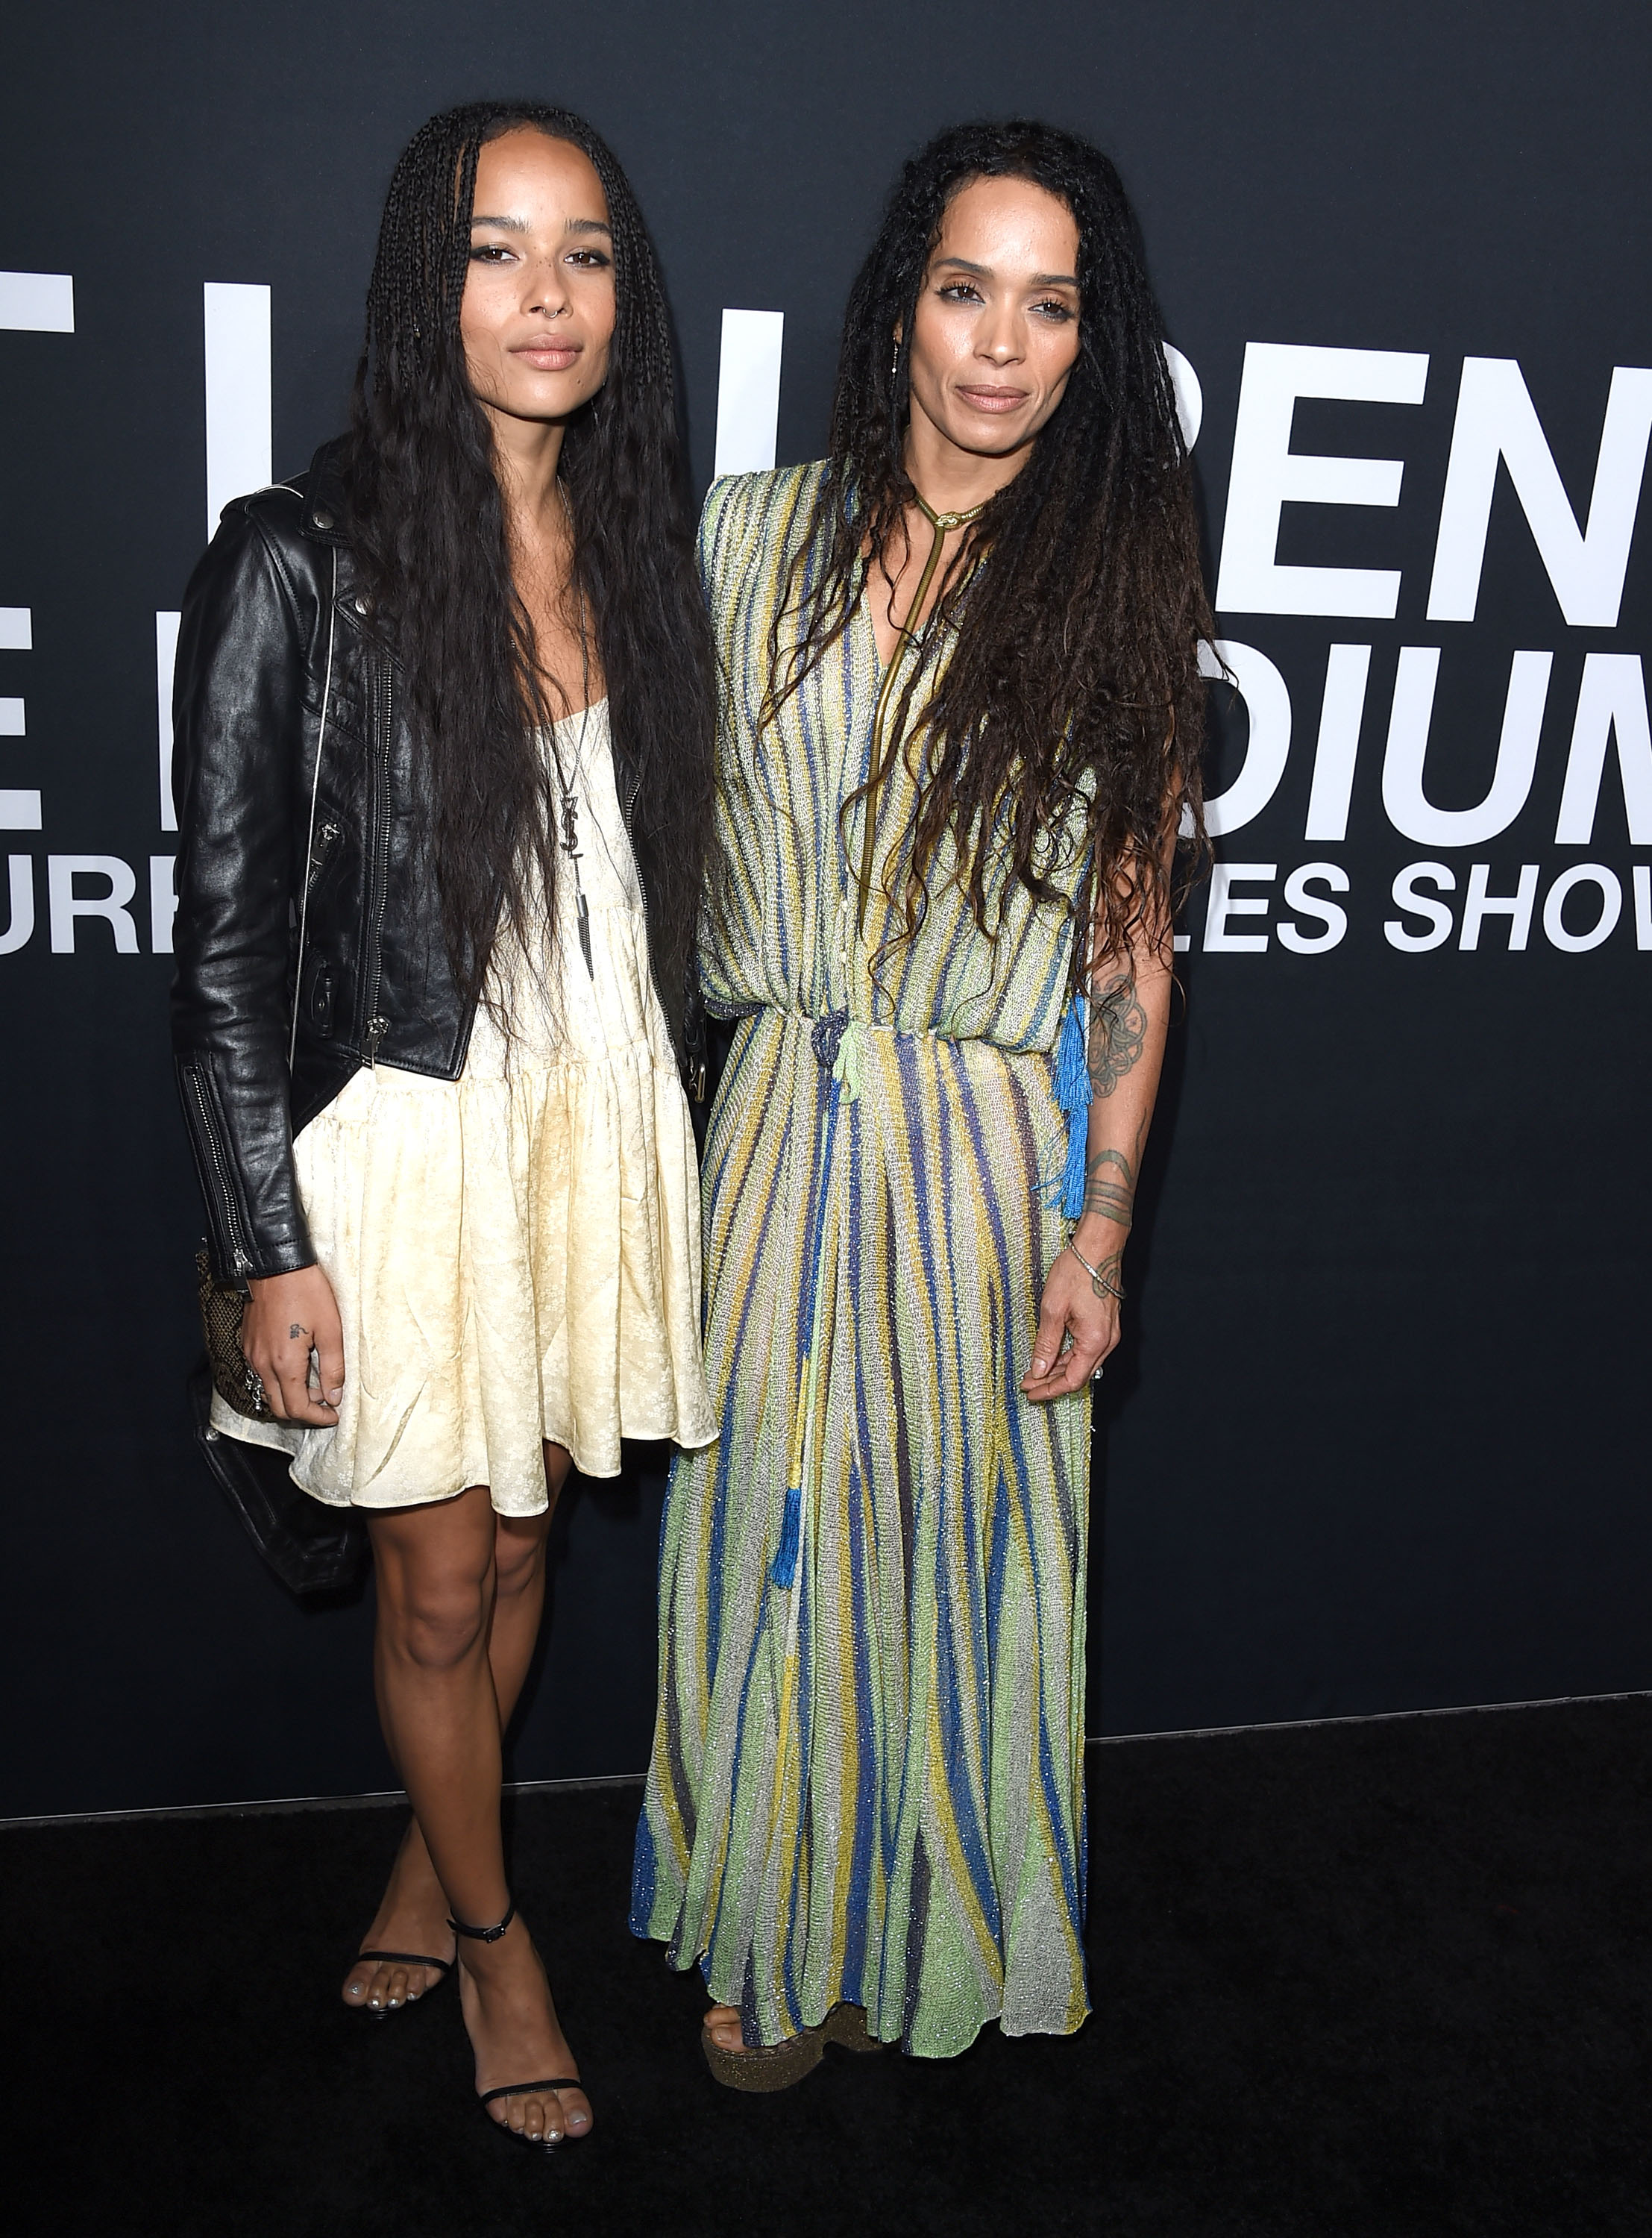 Zoe Kravitz and Lisa Bonet at the Hollywood Palladium on February 10, 2016 in Los Angeles, California | Source: Getty Images